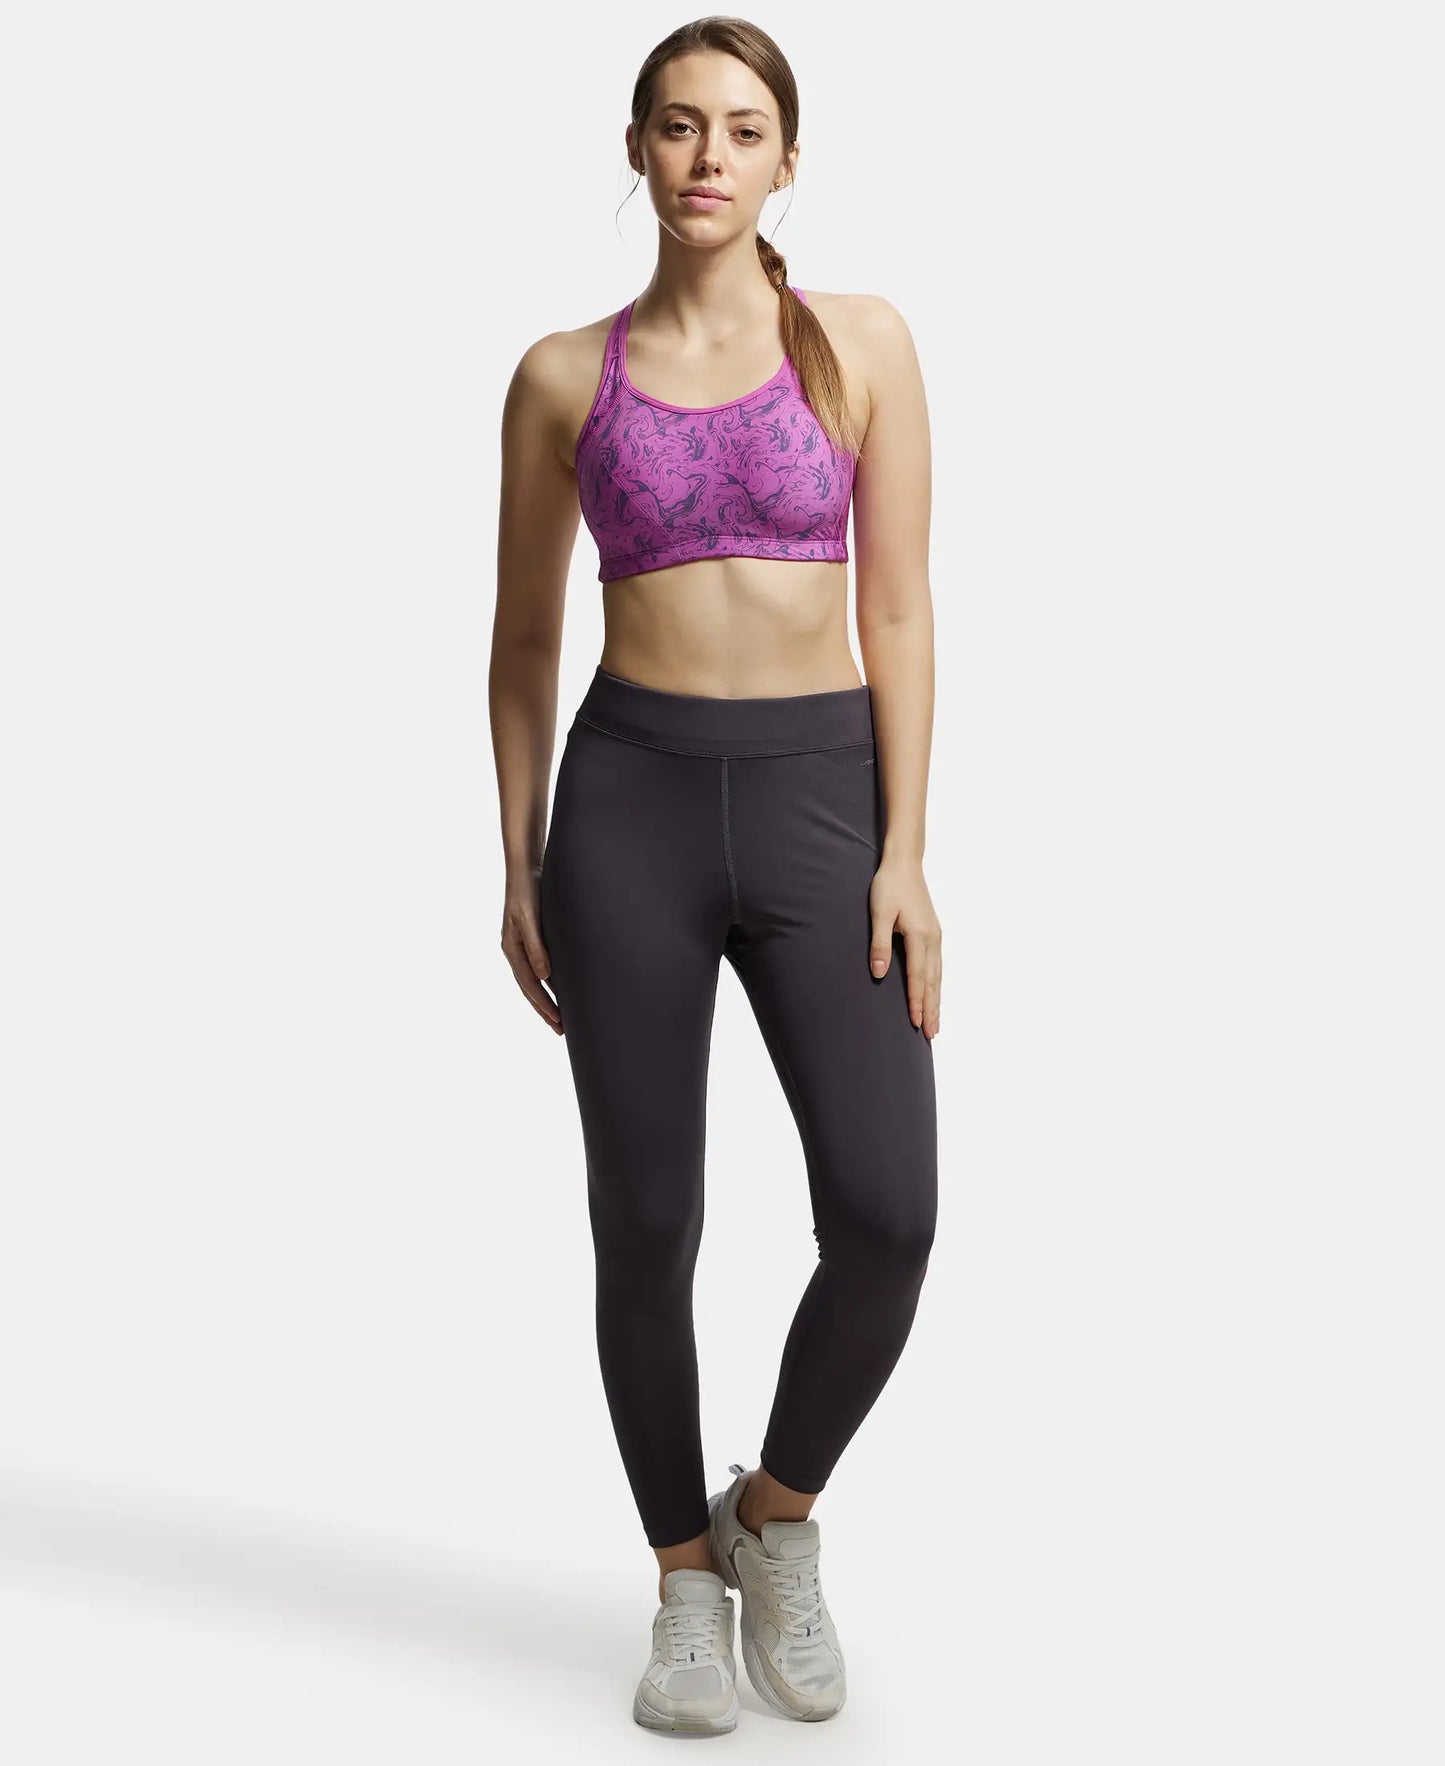 Wirefree Padded Microfiber Elastane Full Coverage Sports Bra with Optional Racer Back Styling - Lavender Scent Assorted Prints-4